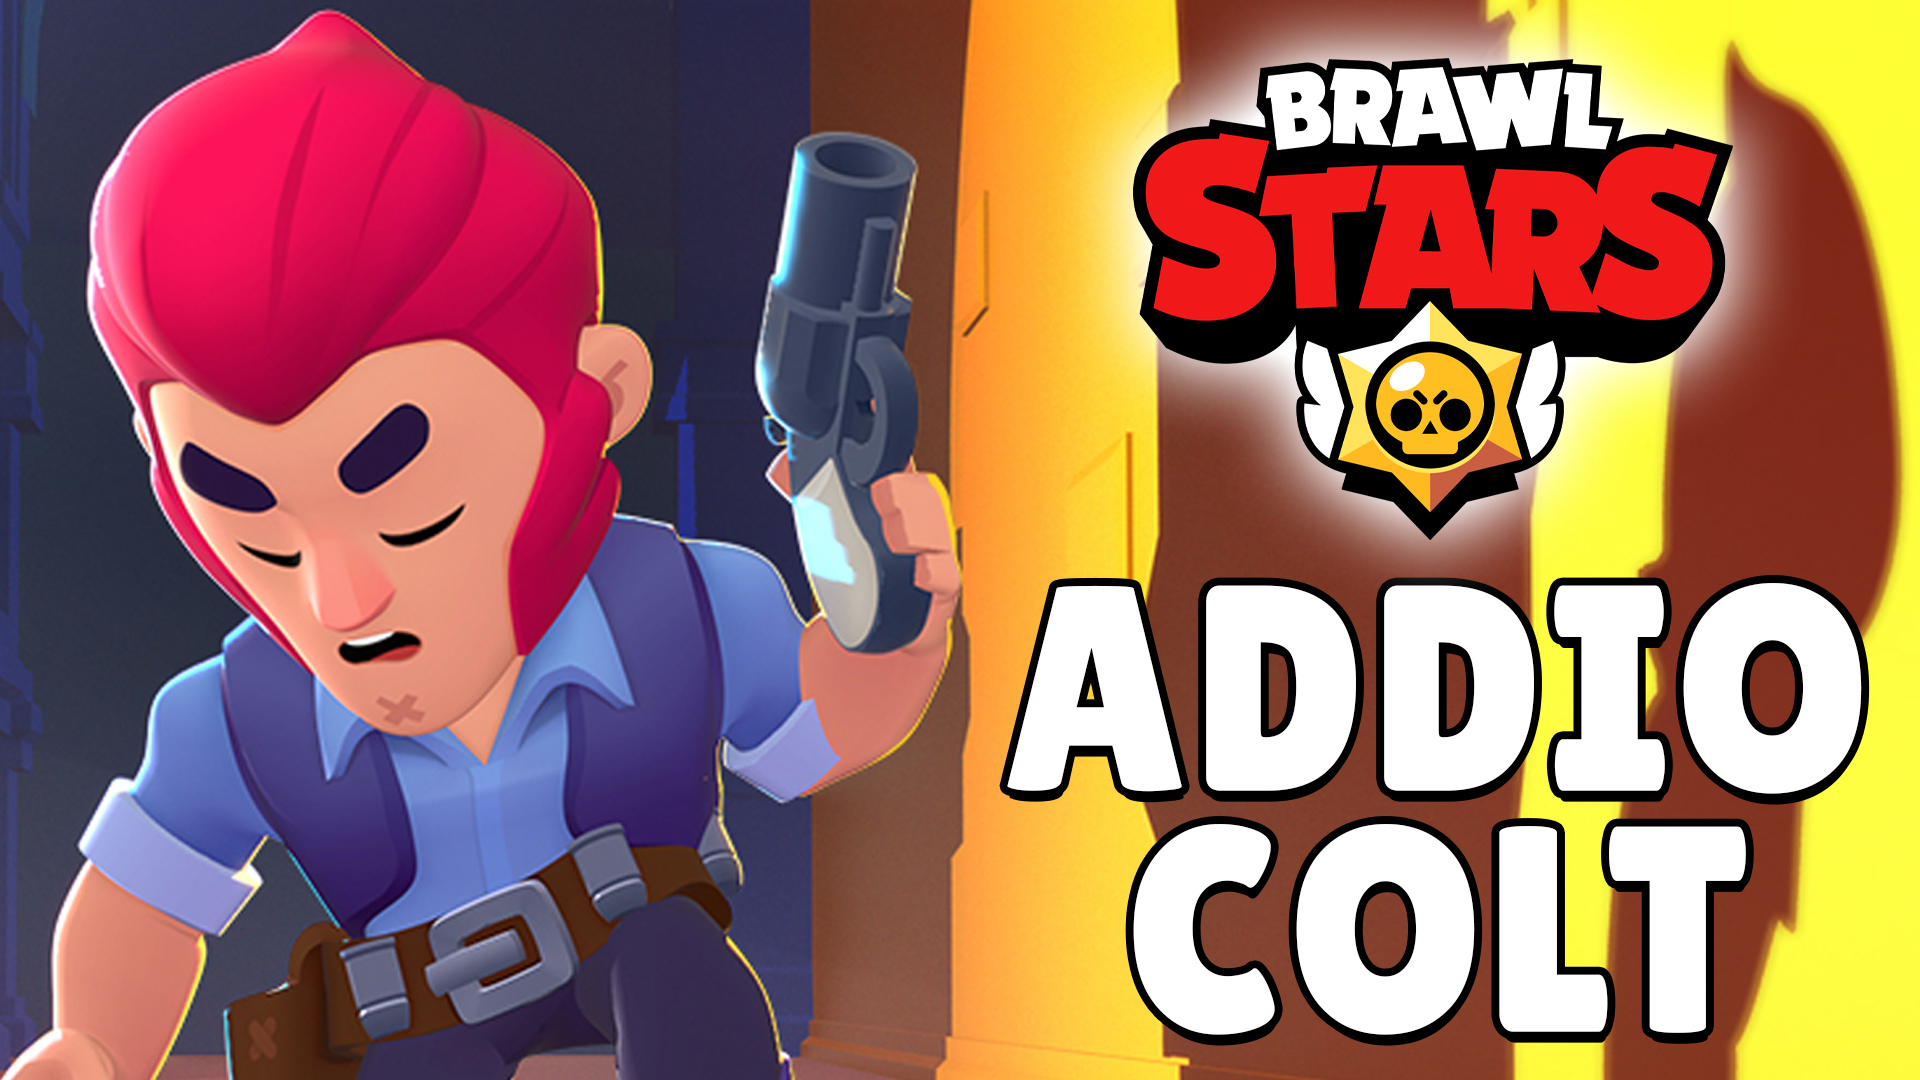 Balance Changes And Bad News For Bea Colt And Edgar - brawl stars may update balance changes